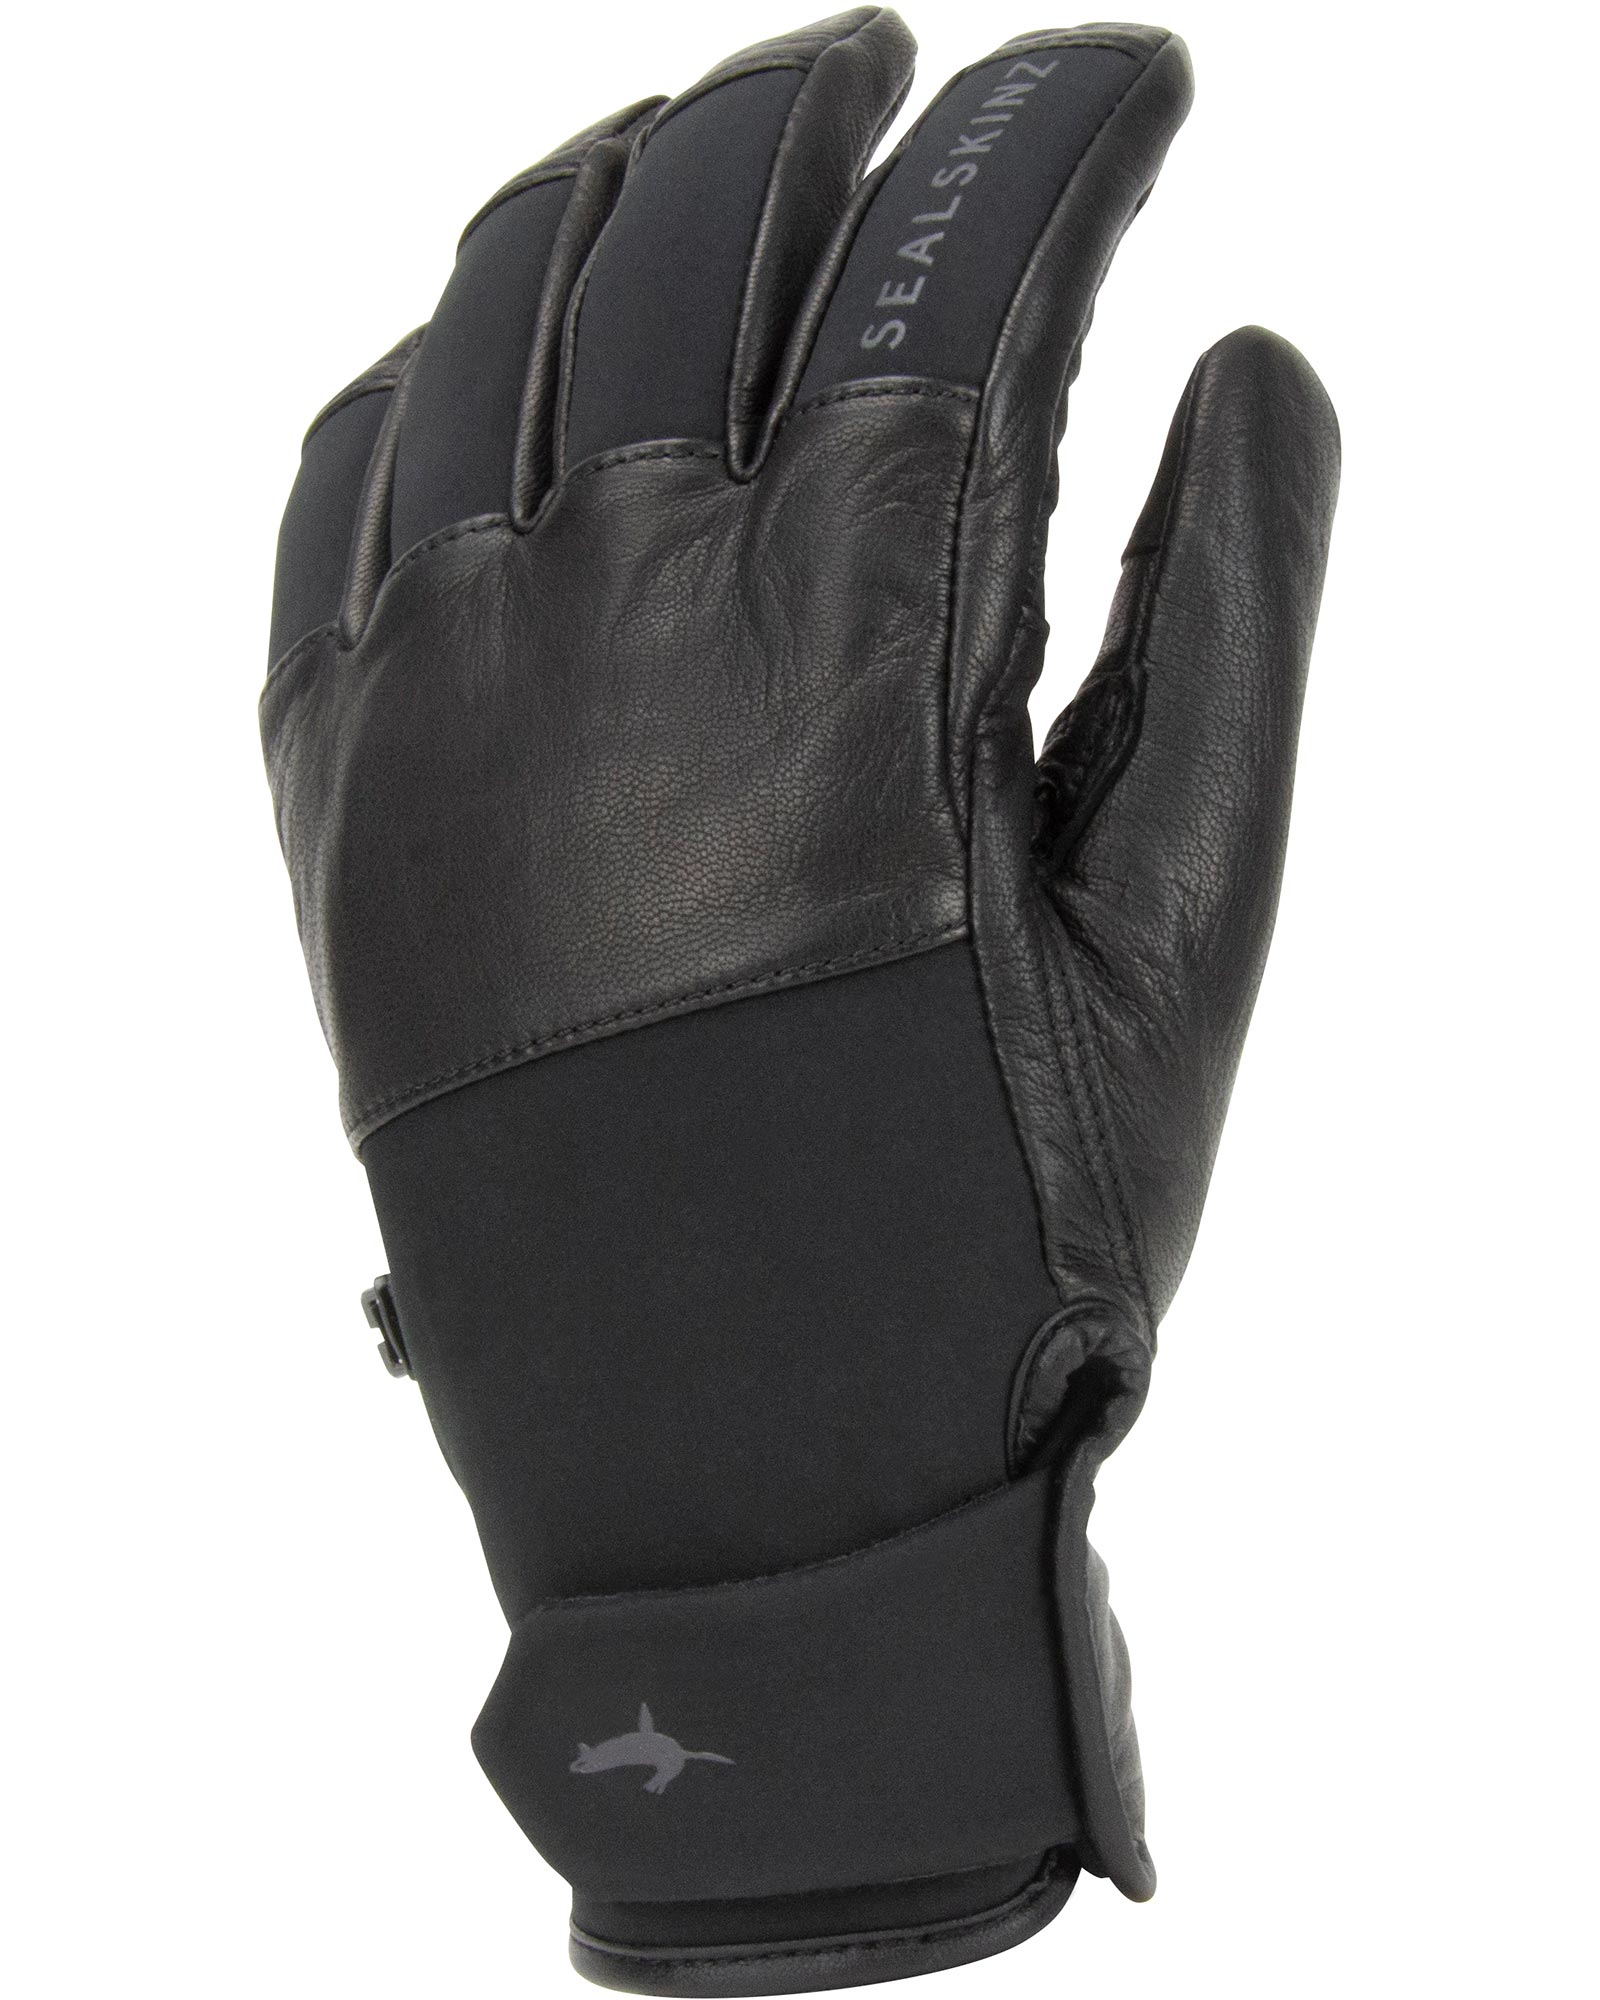 SealSkinz Fusion Control Cold Weather Gloves - black XL